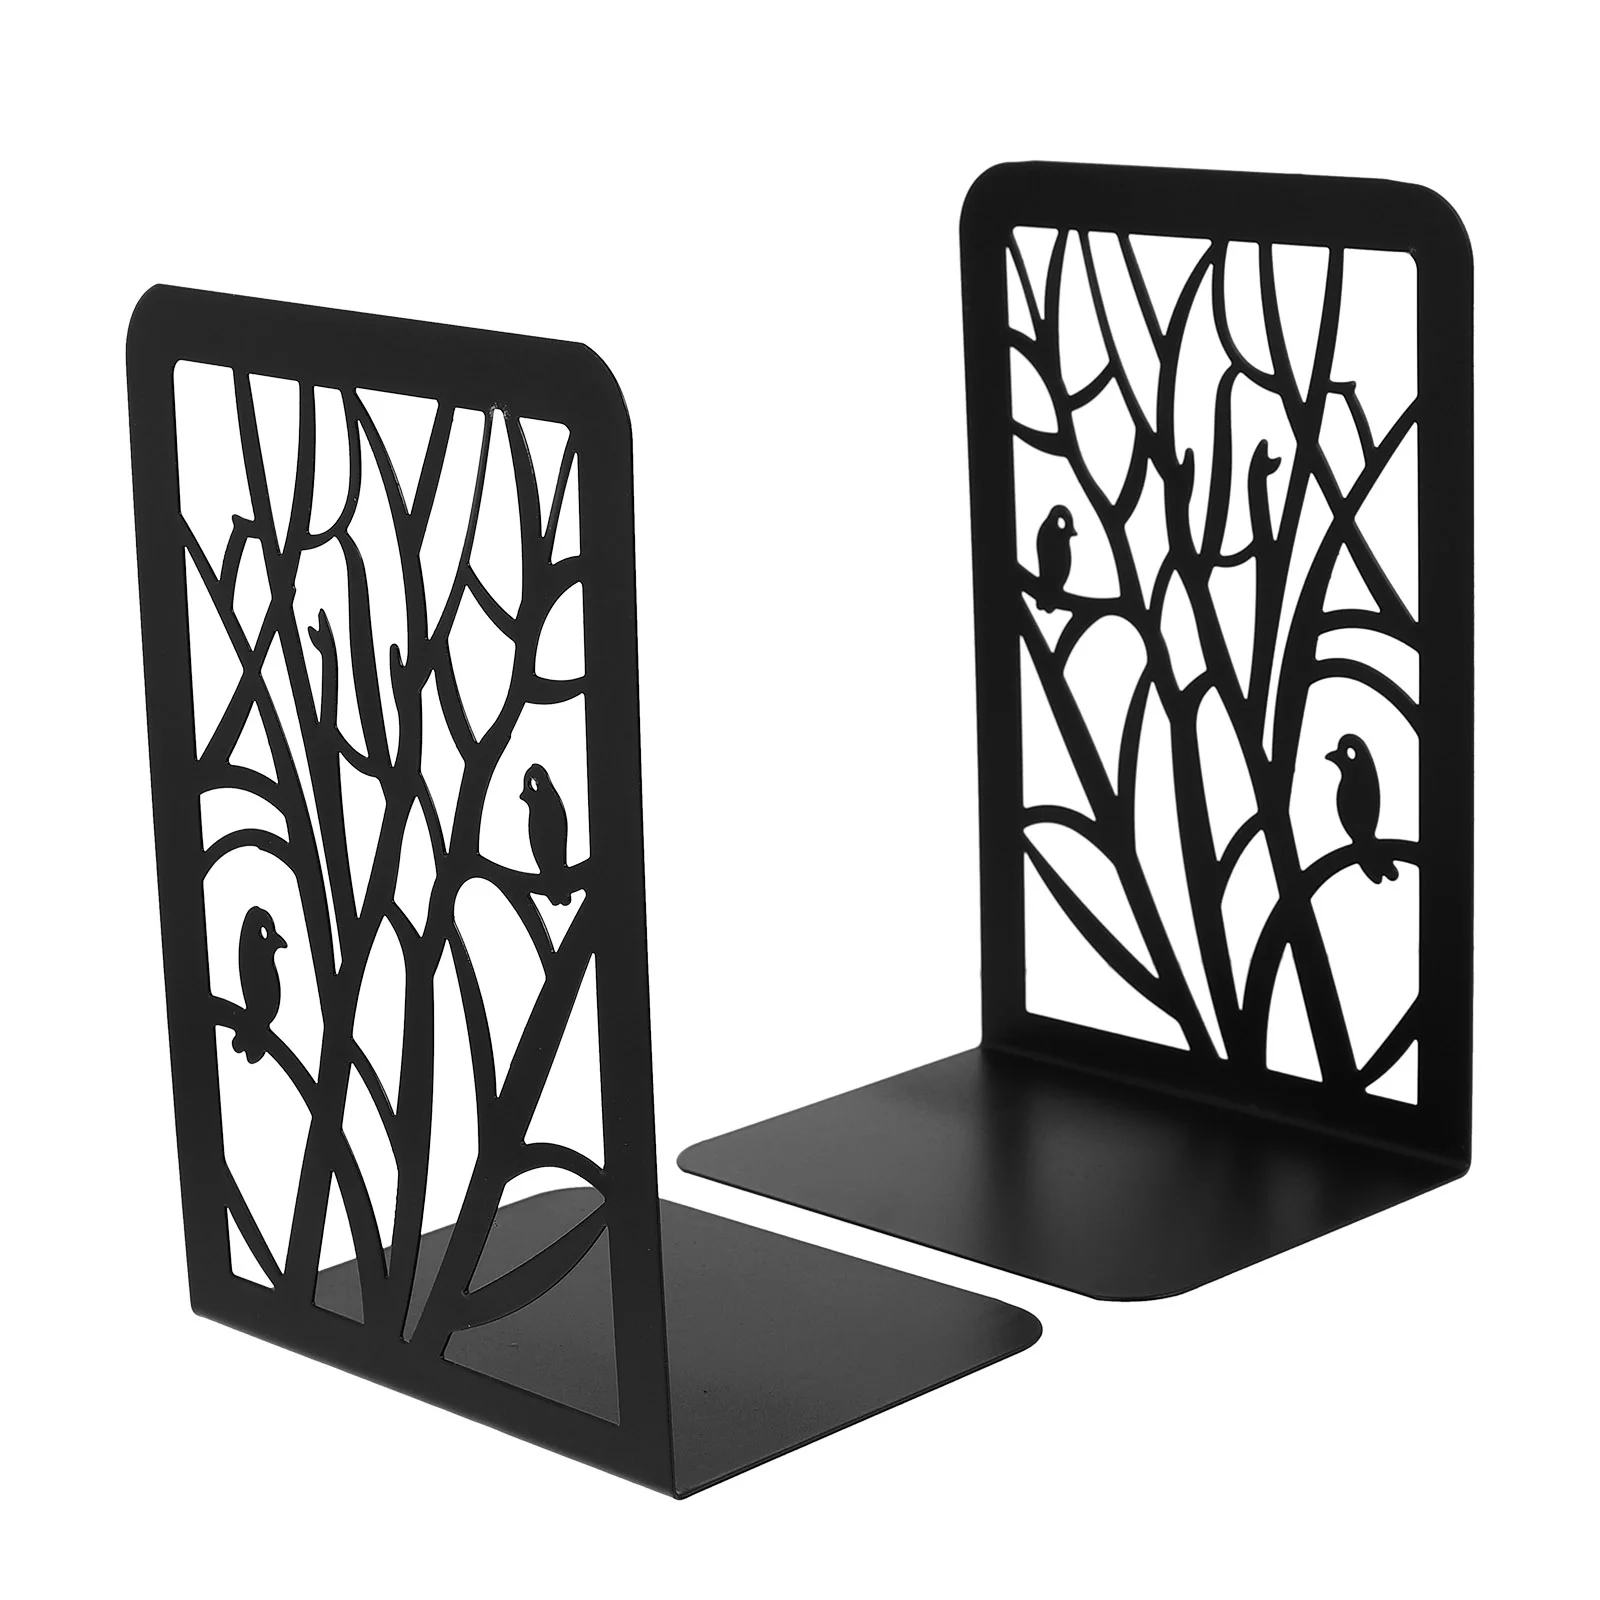 

2 Pcs Metal Tree Shadow Bookend Storage Rack Support Childrens Bookshelf Vintage Office Shelves Material Bookends